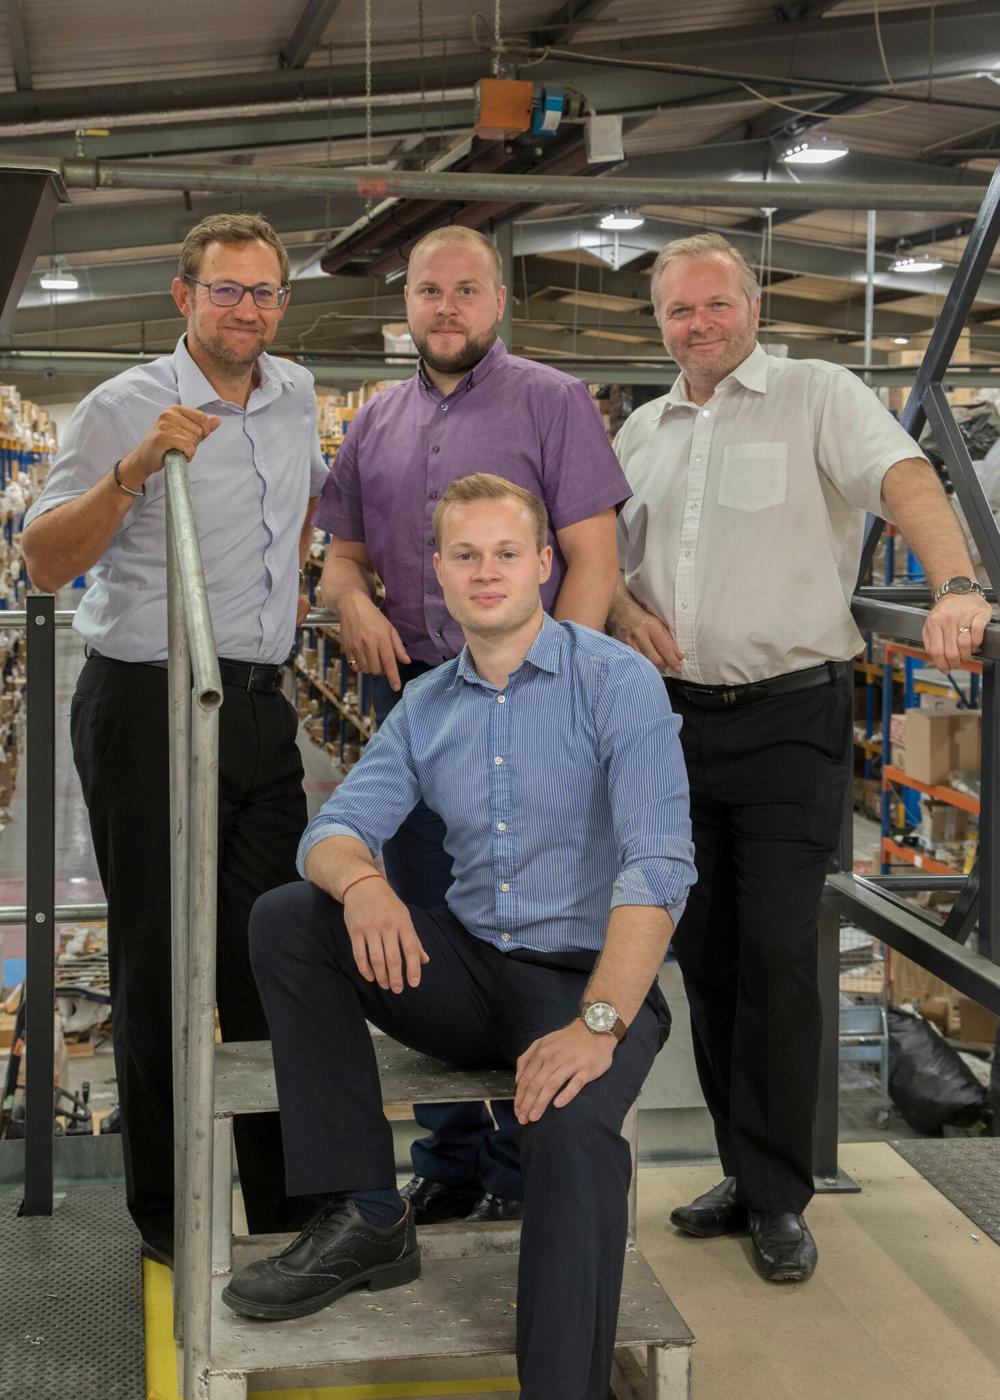 Midlands’ Engine success: A Perry & Co invests £4 million to drive market growth